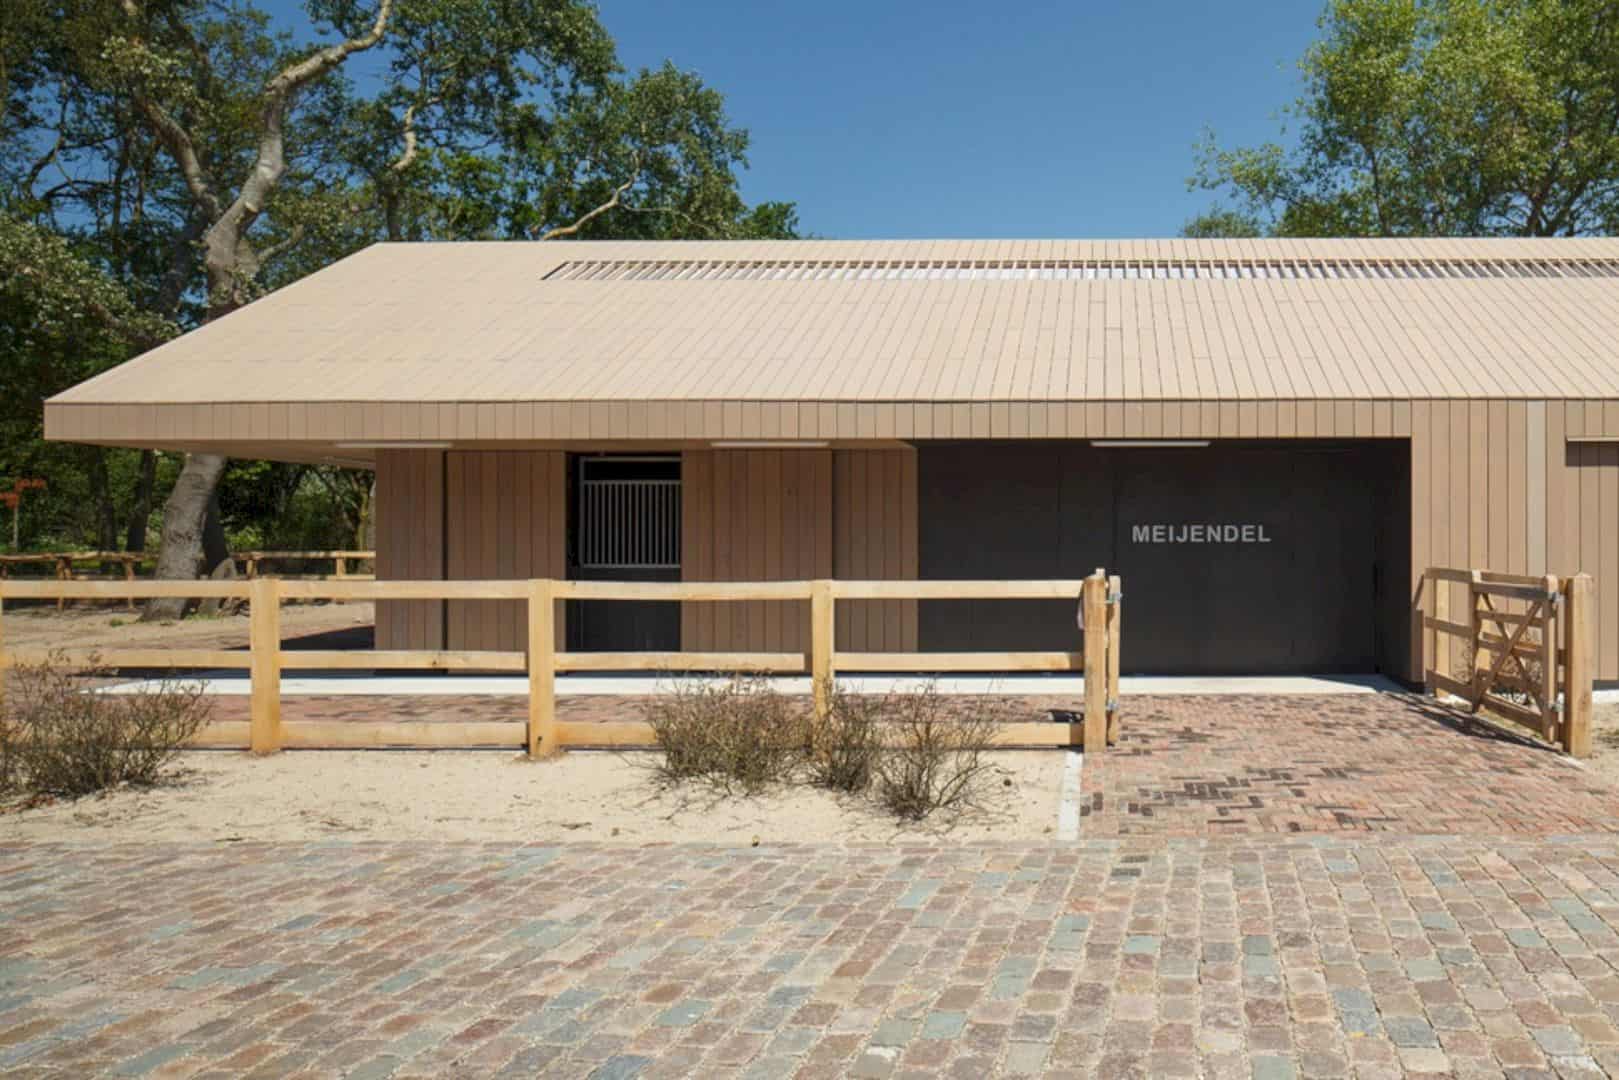 Meijendel Visitors Center & Stables Designing A New Stable In Style 9